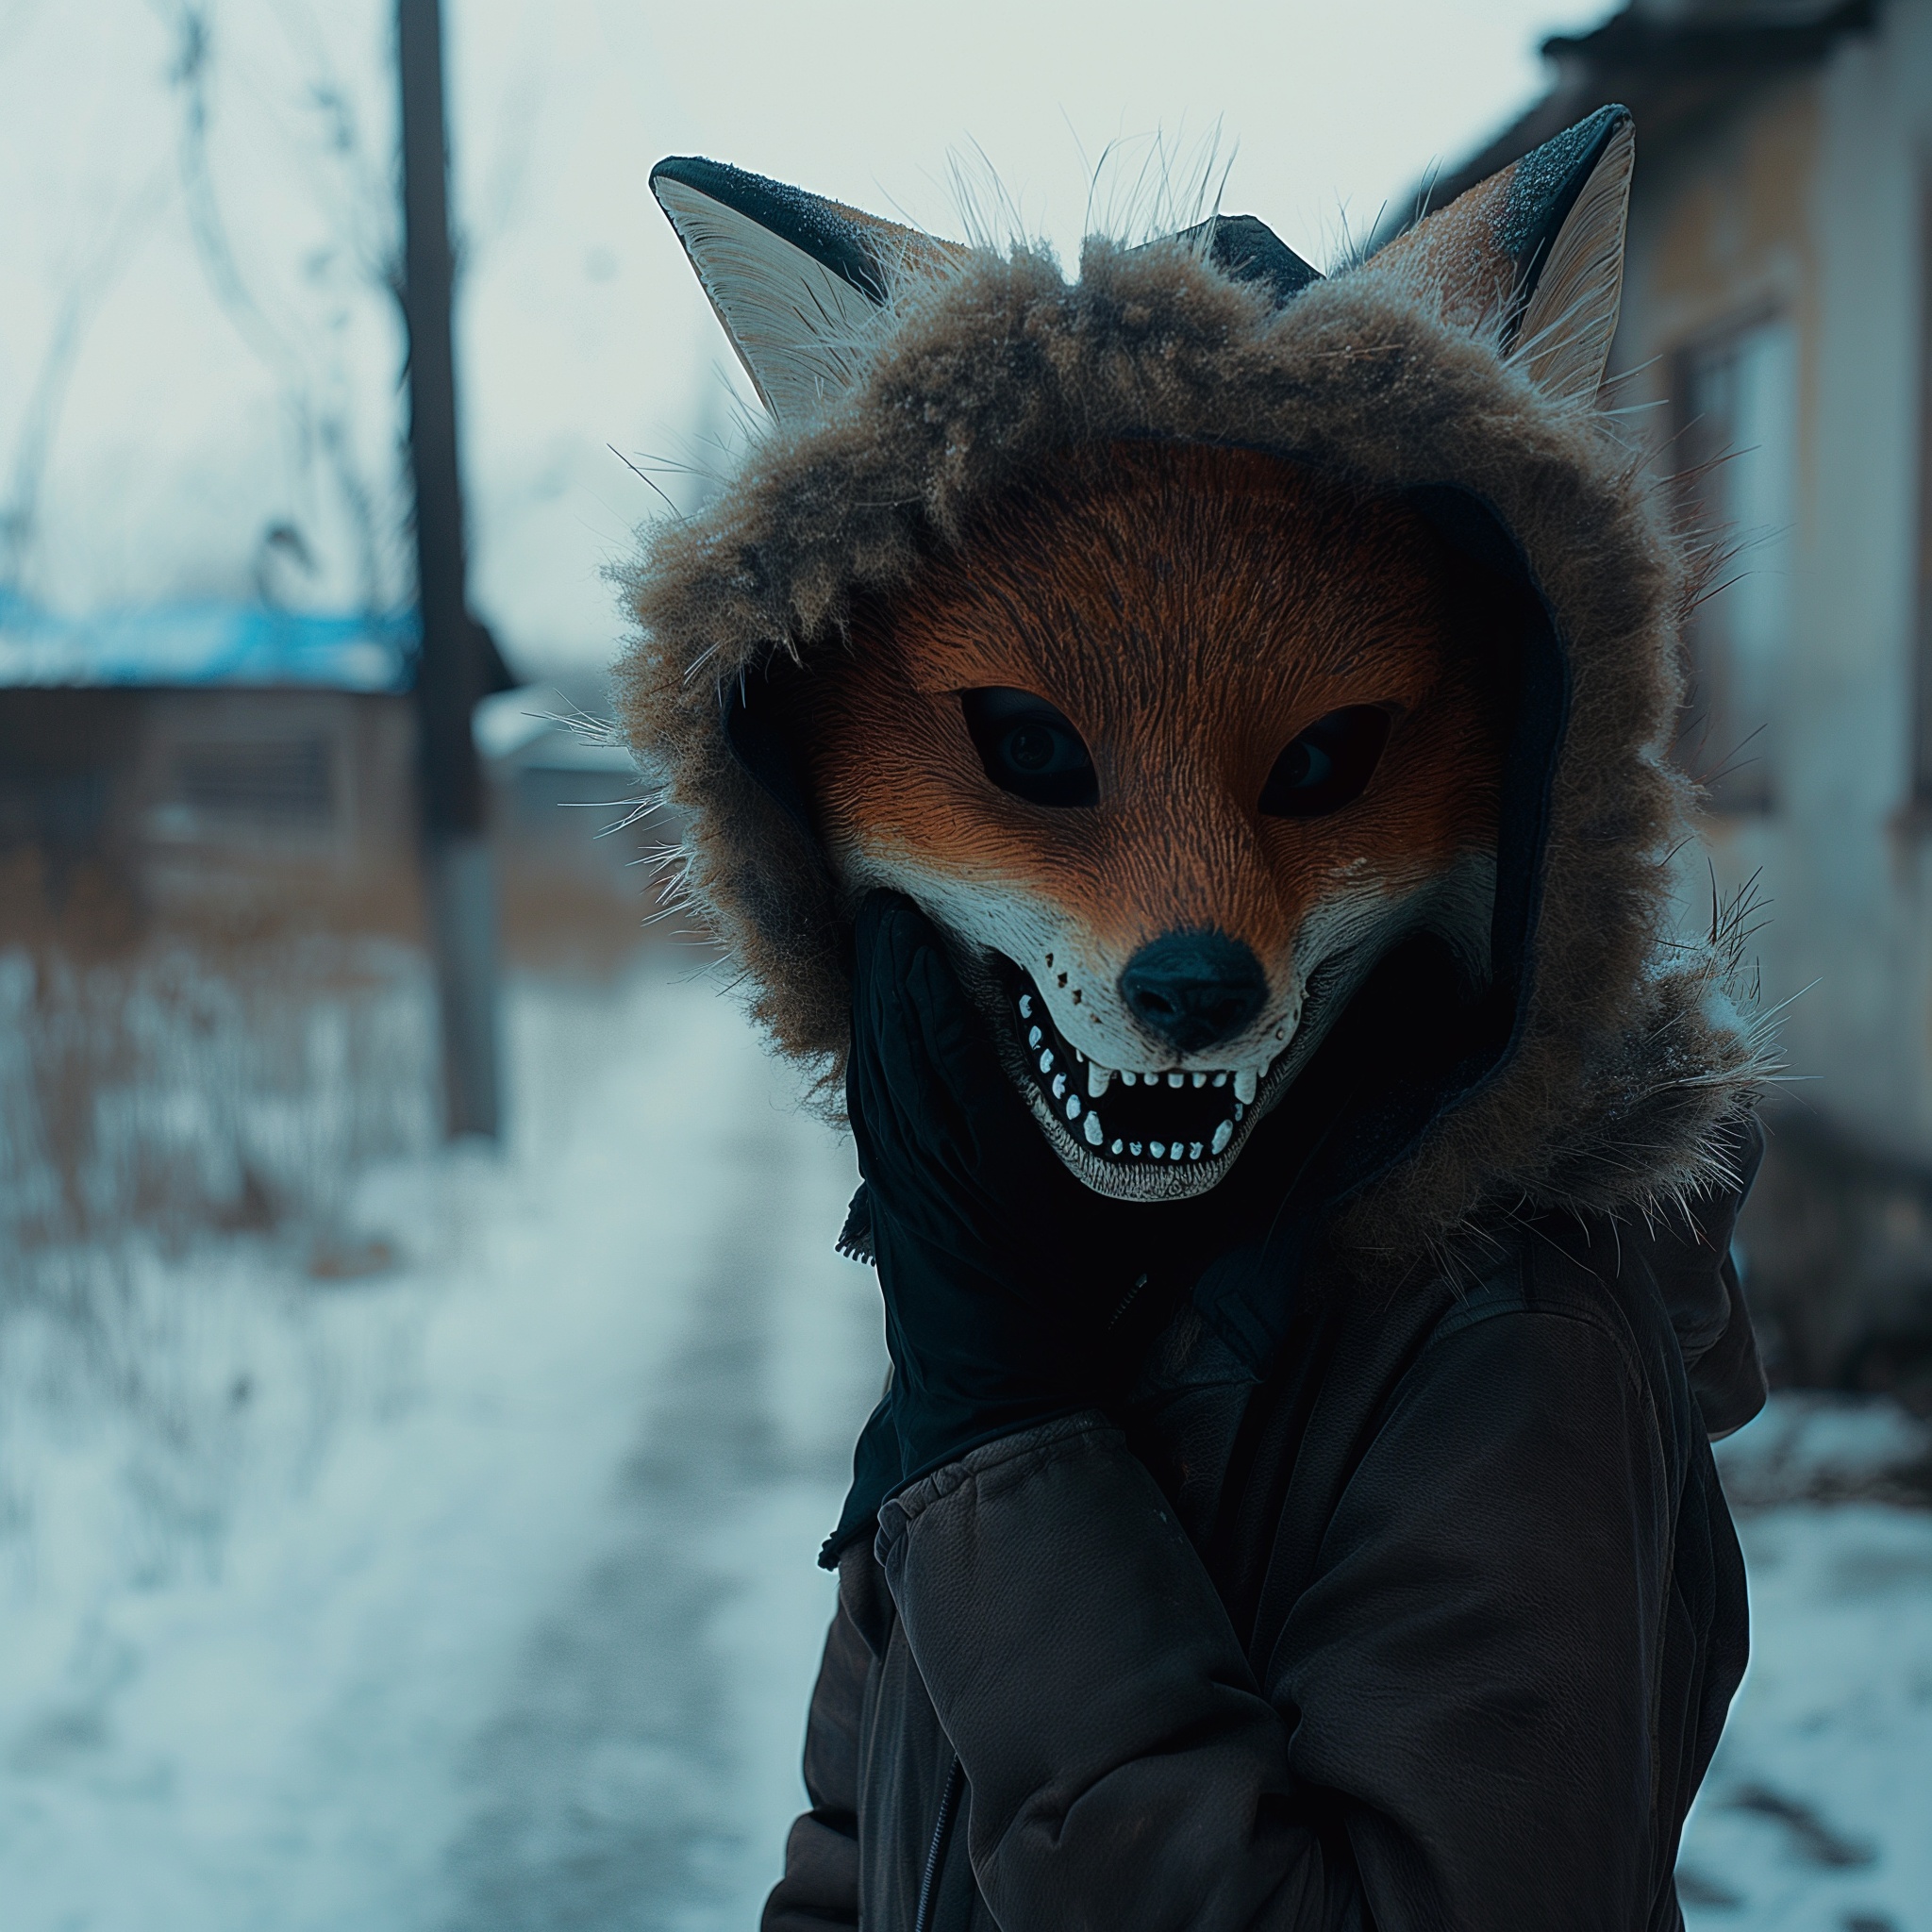 13-Year-Old Girl Identifies As A Fox And Wears A Mask And Tail